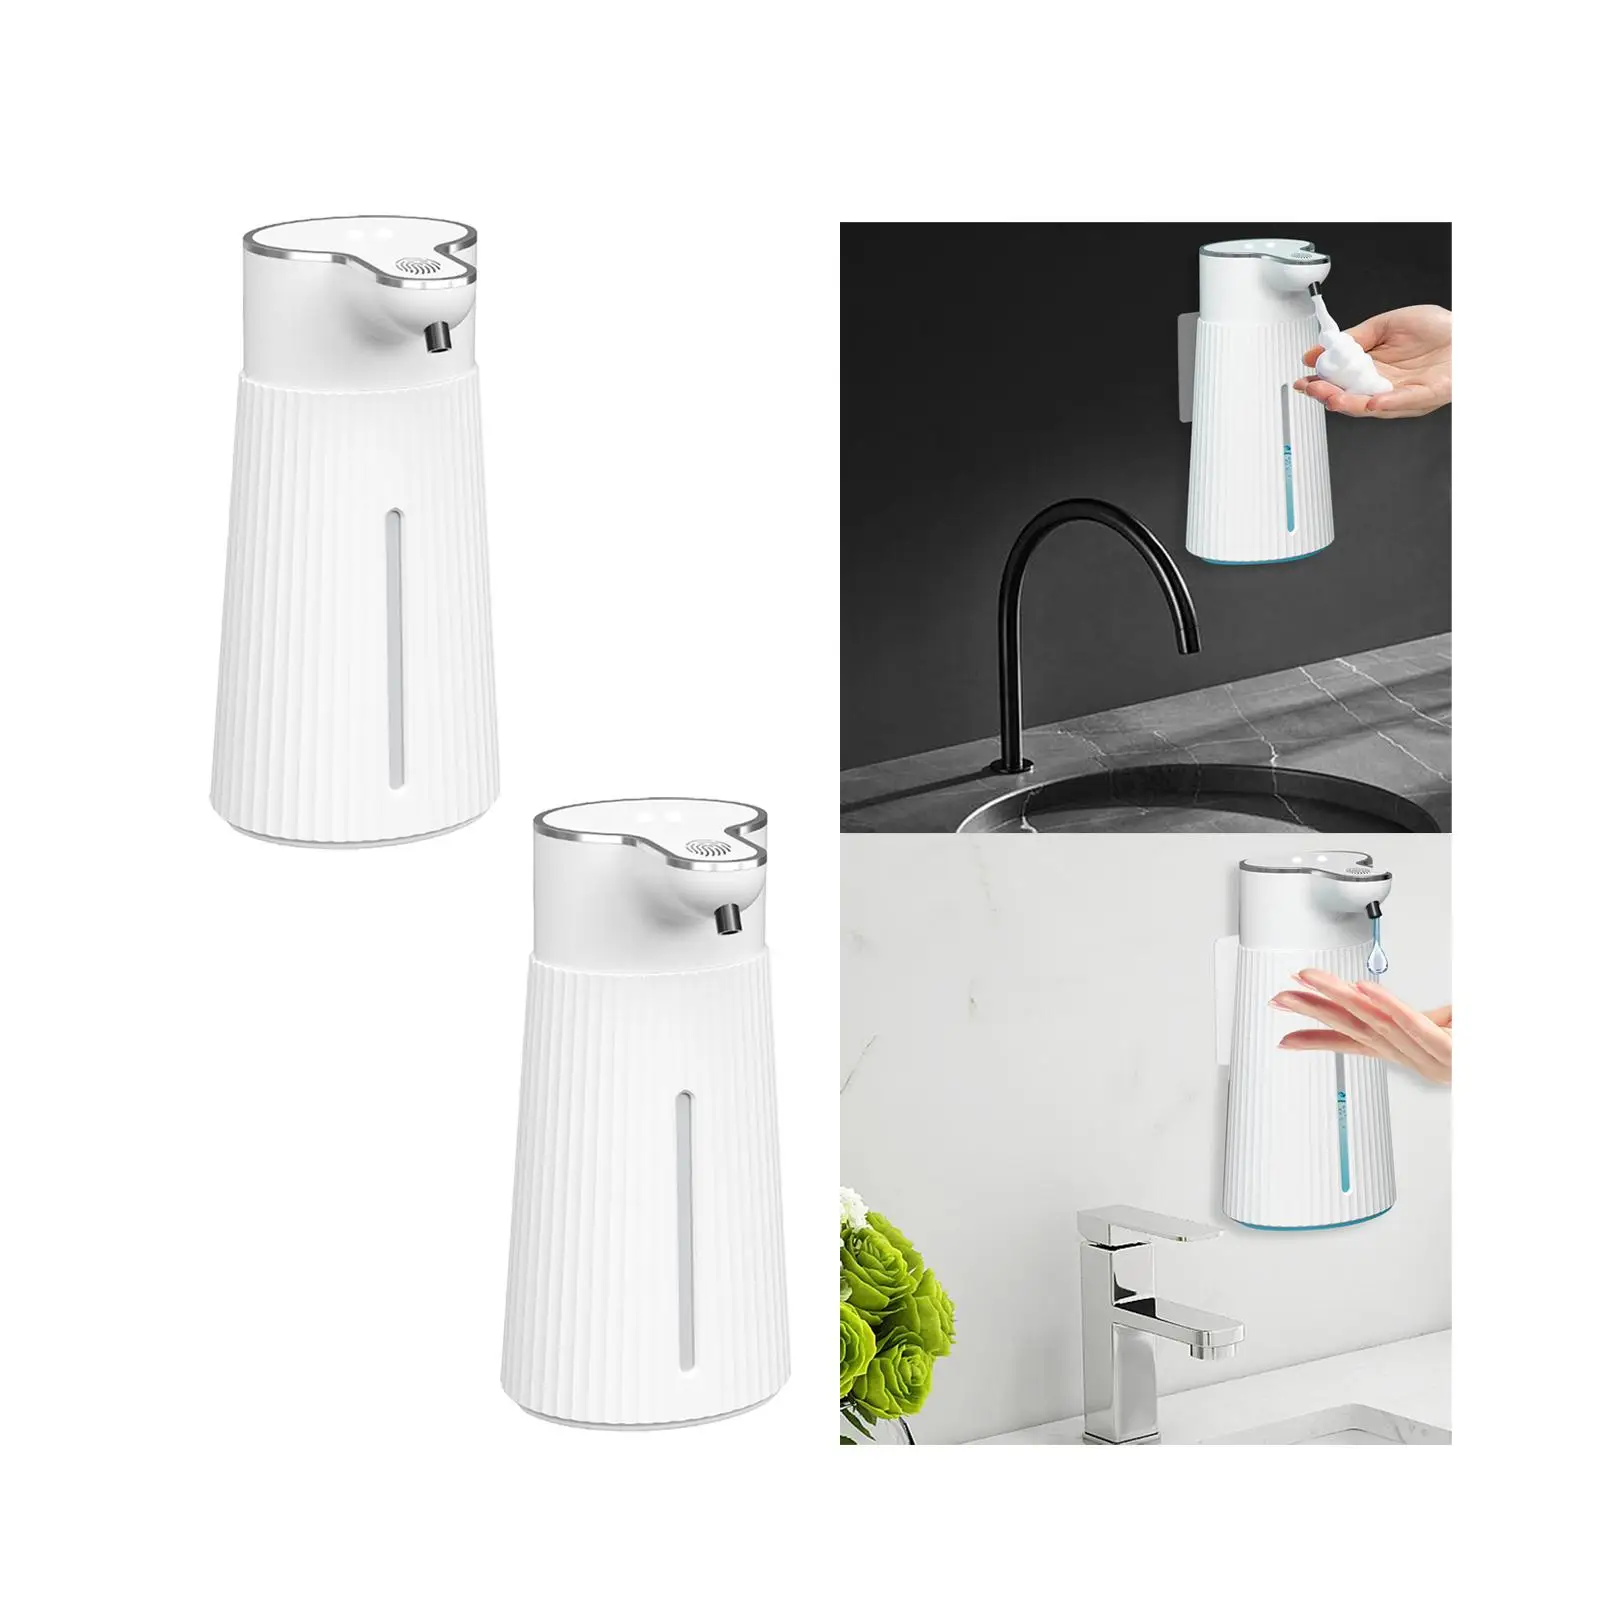 Automatic Liquid Soap Dispenser Wall Mounted Touchless Hand Soap Dispenser for Offices Restaurant Commercial Kitchen Restoom